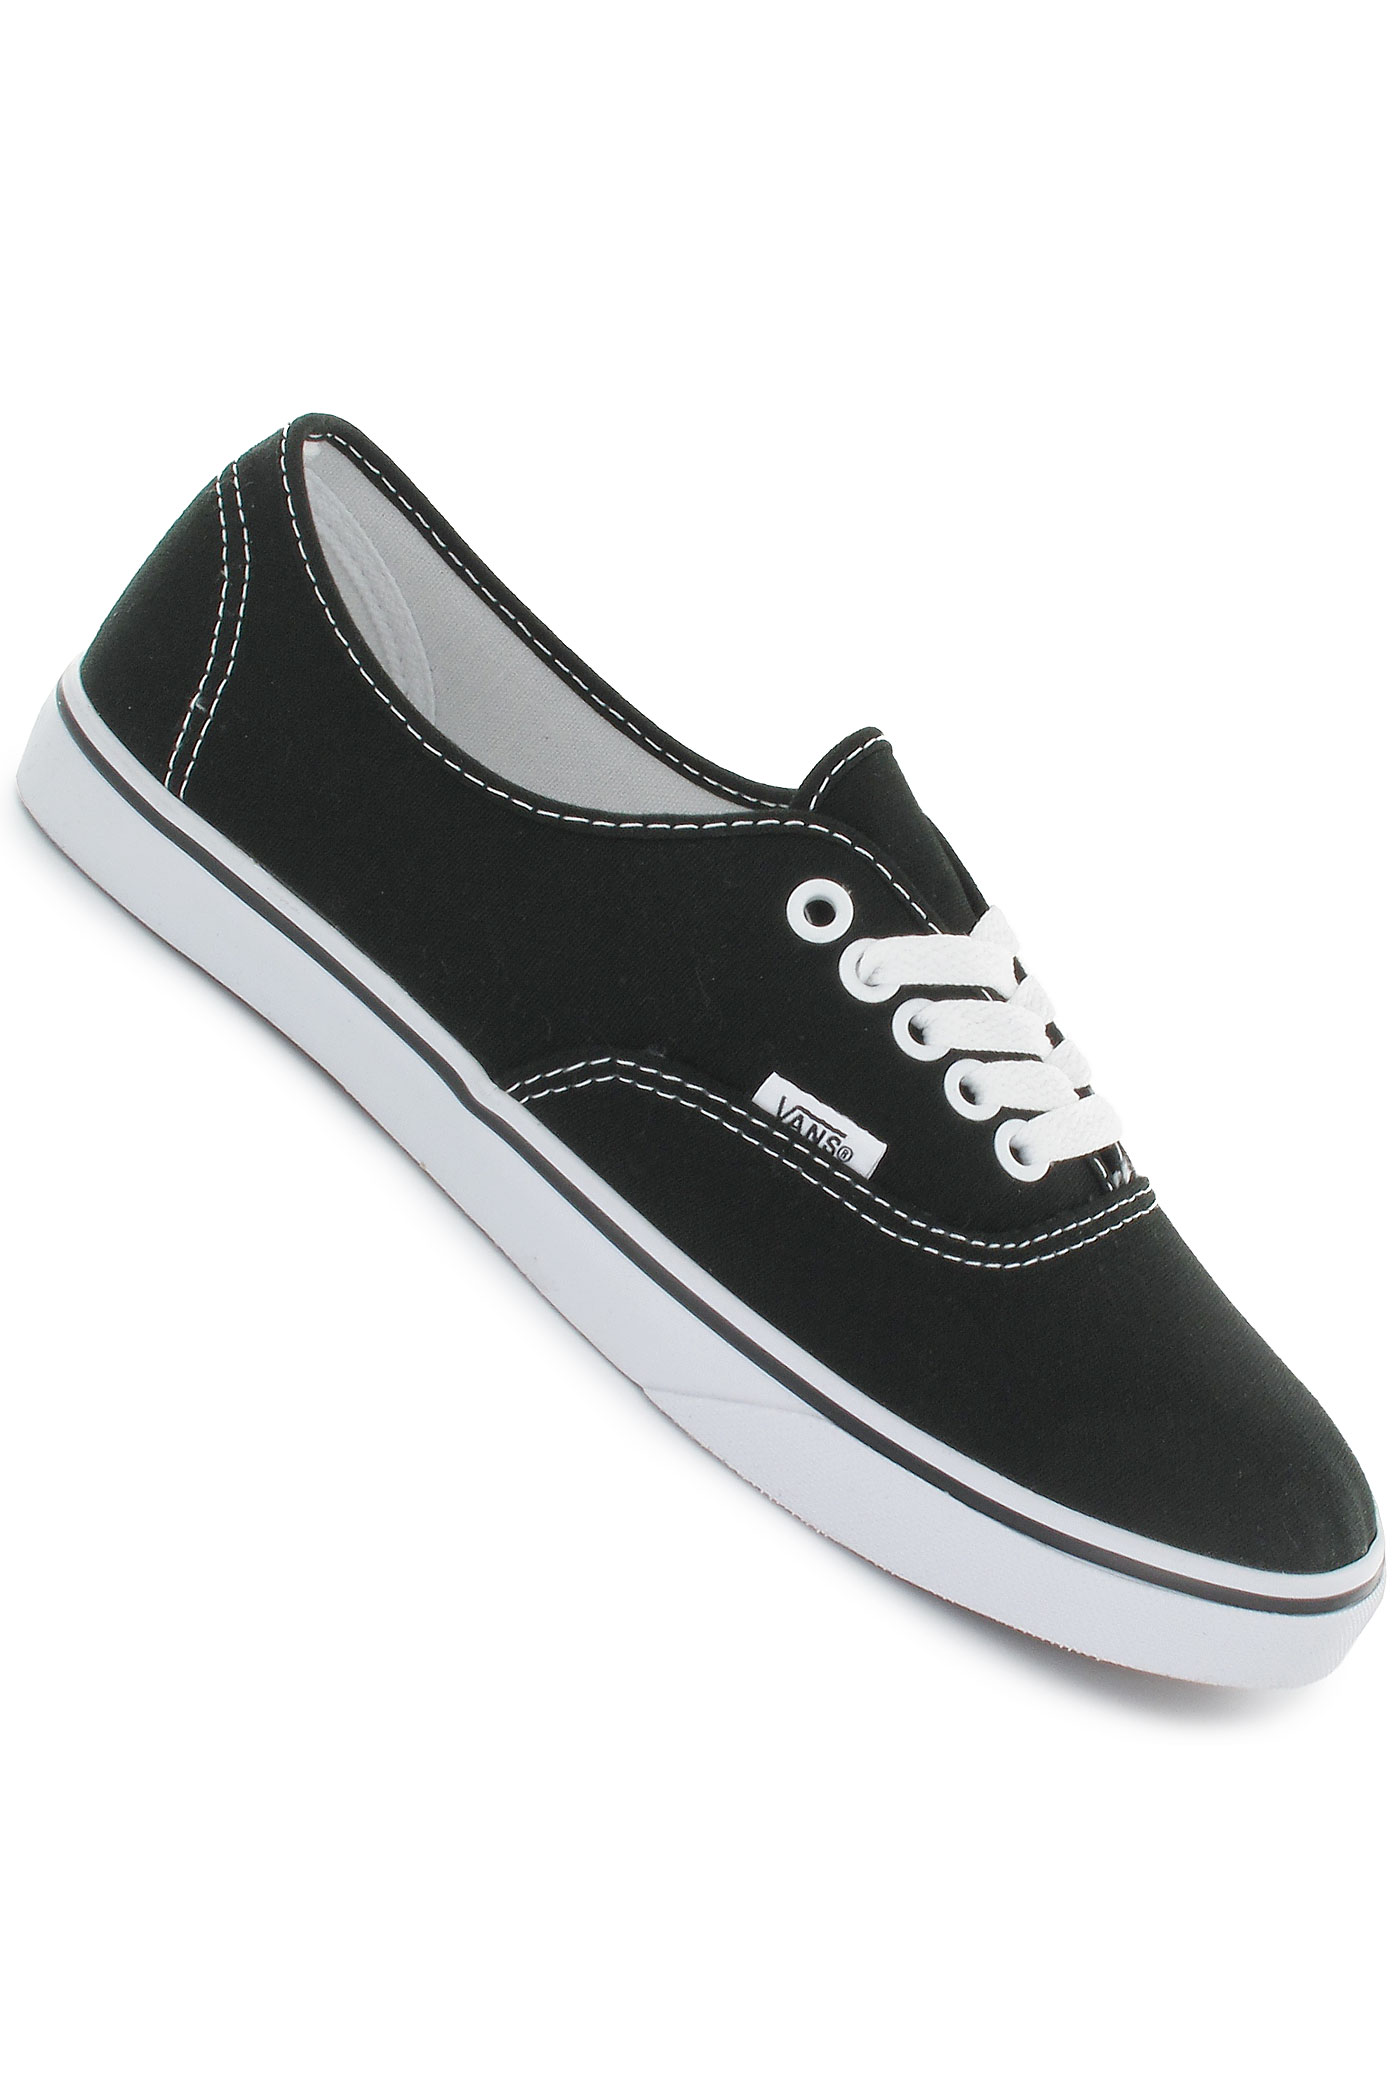 types of vans shoes